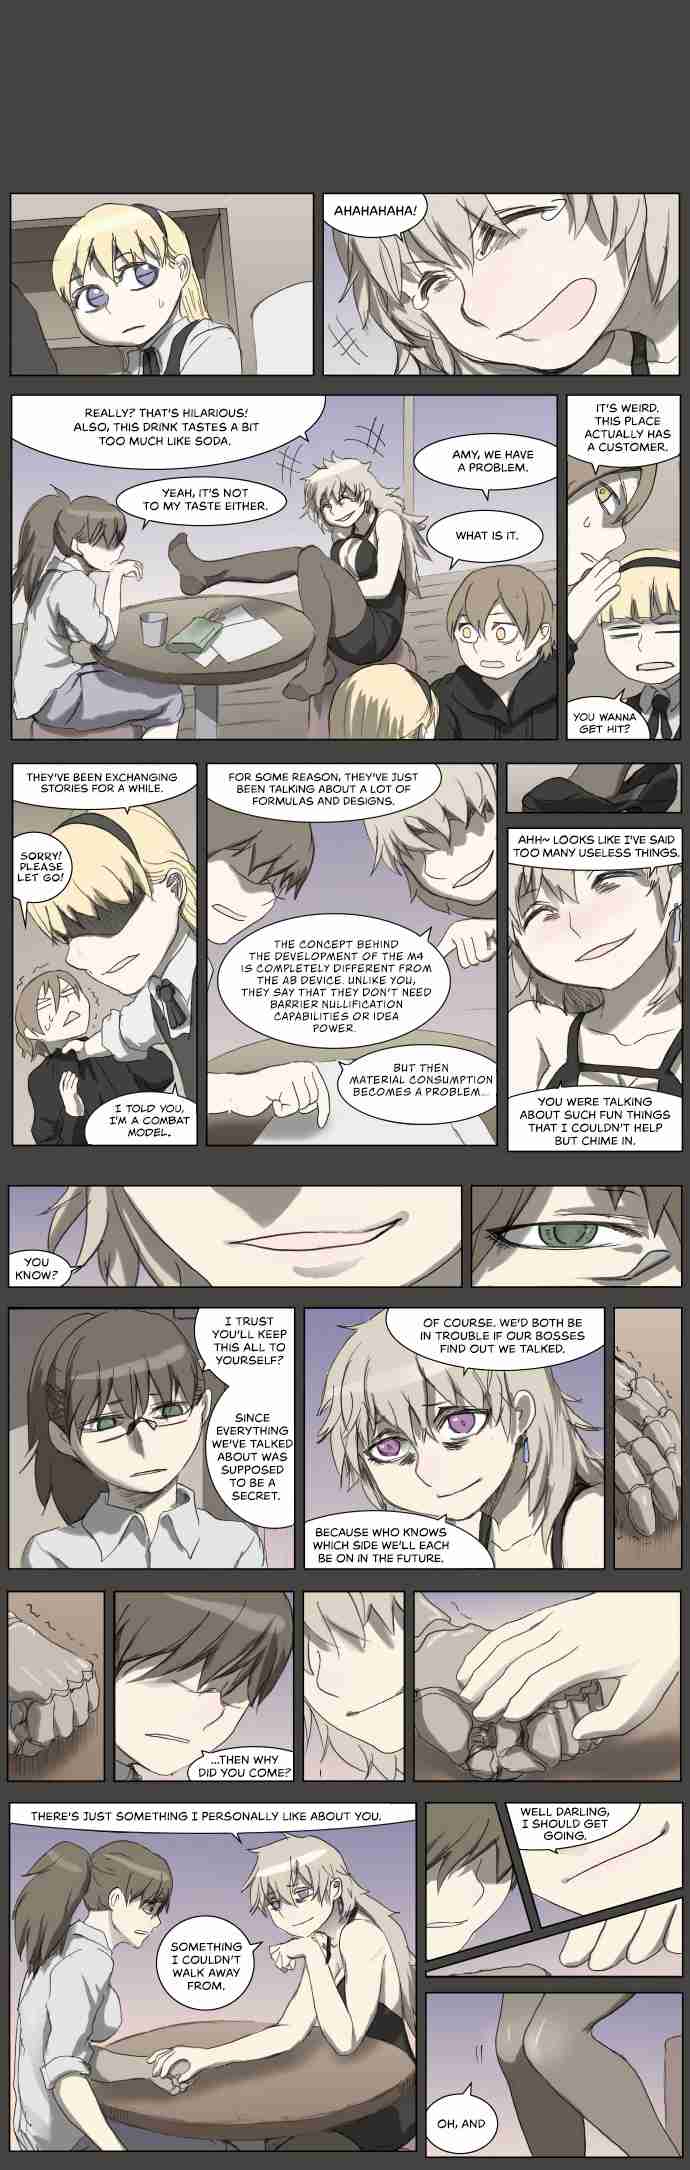 Knight Run Vol. 3 Ch. 179 Hero Part 10 | Those who left and those who remain